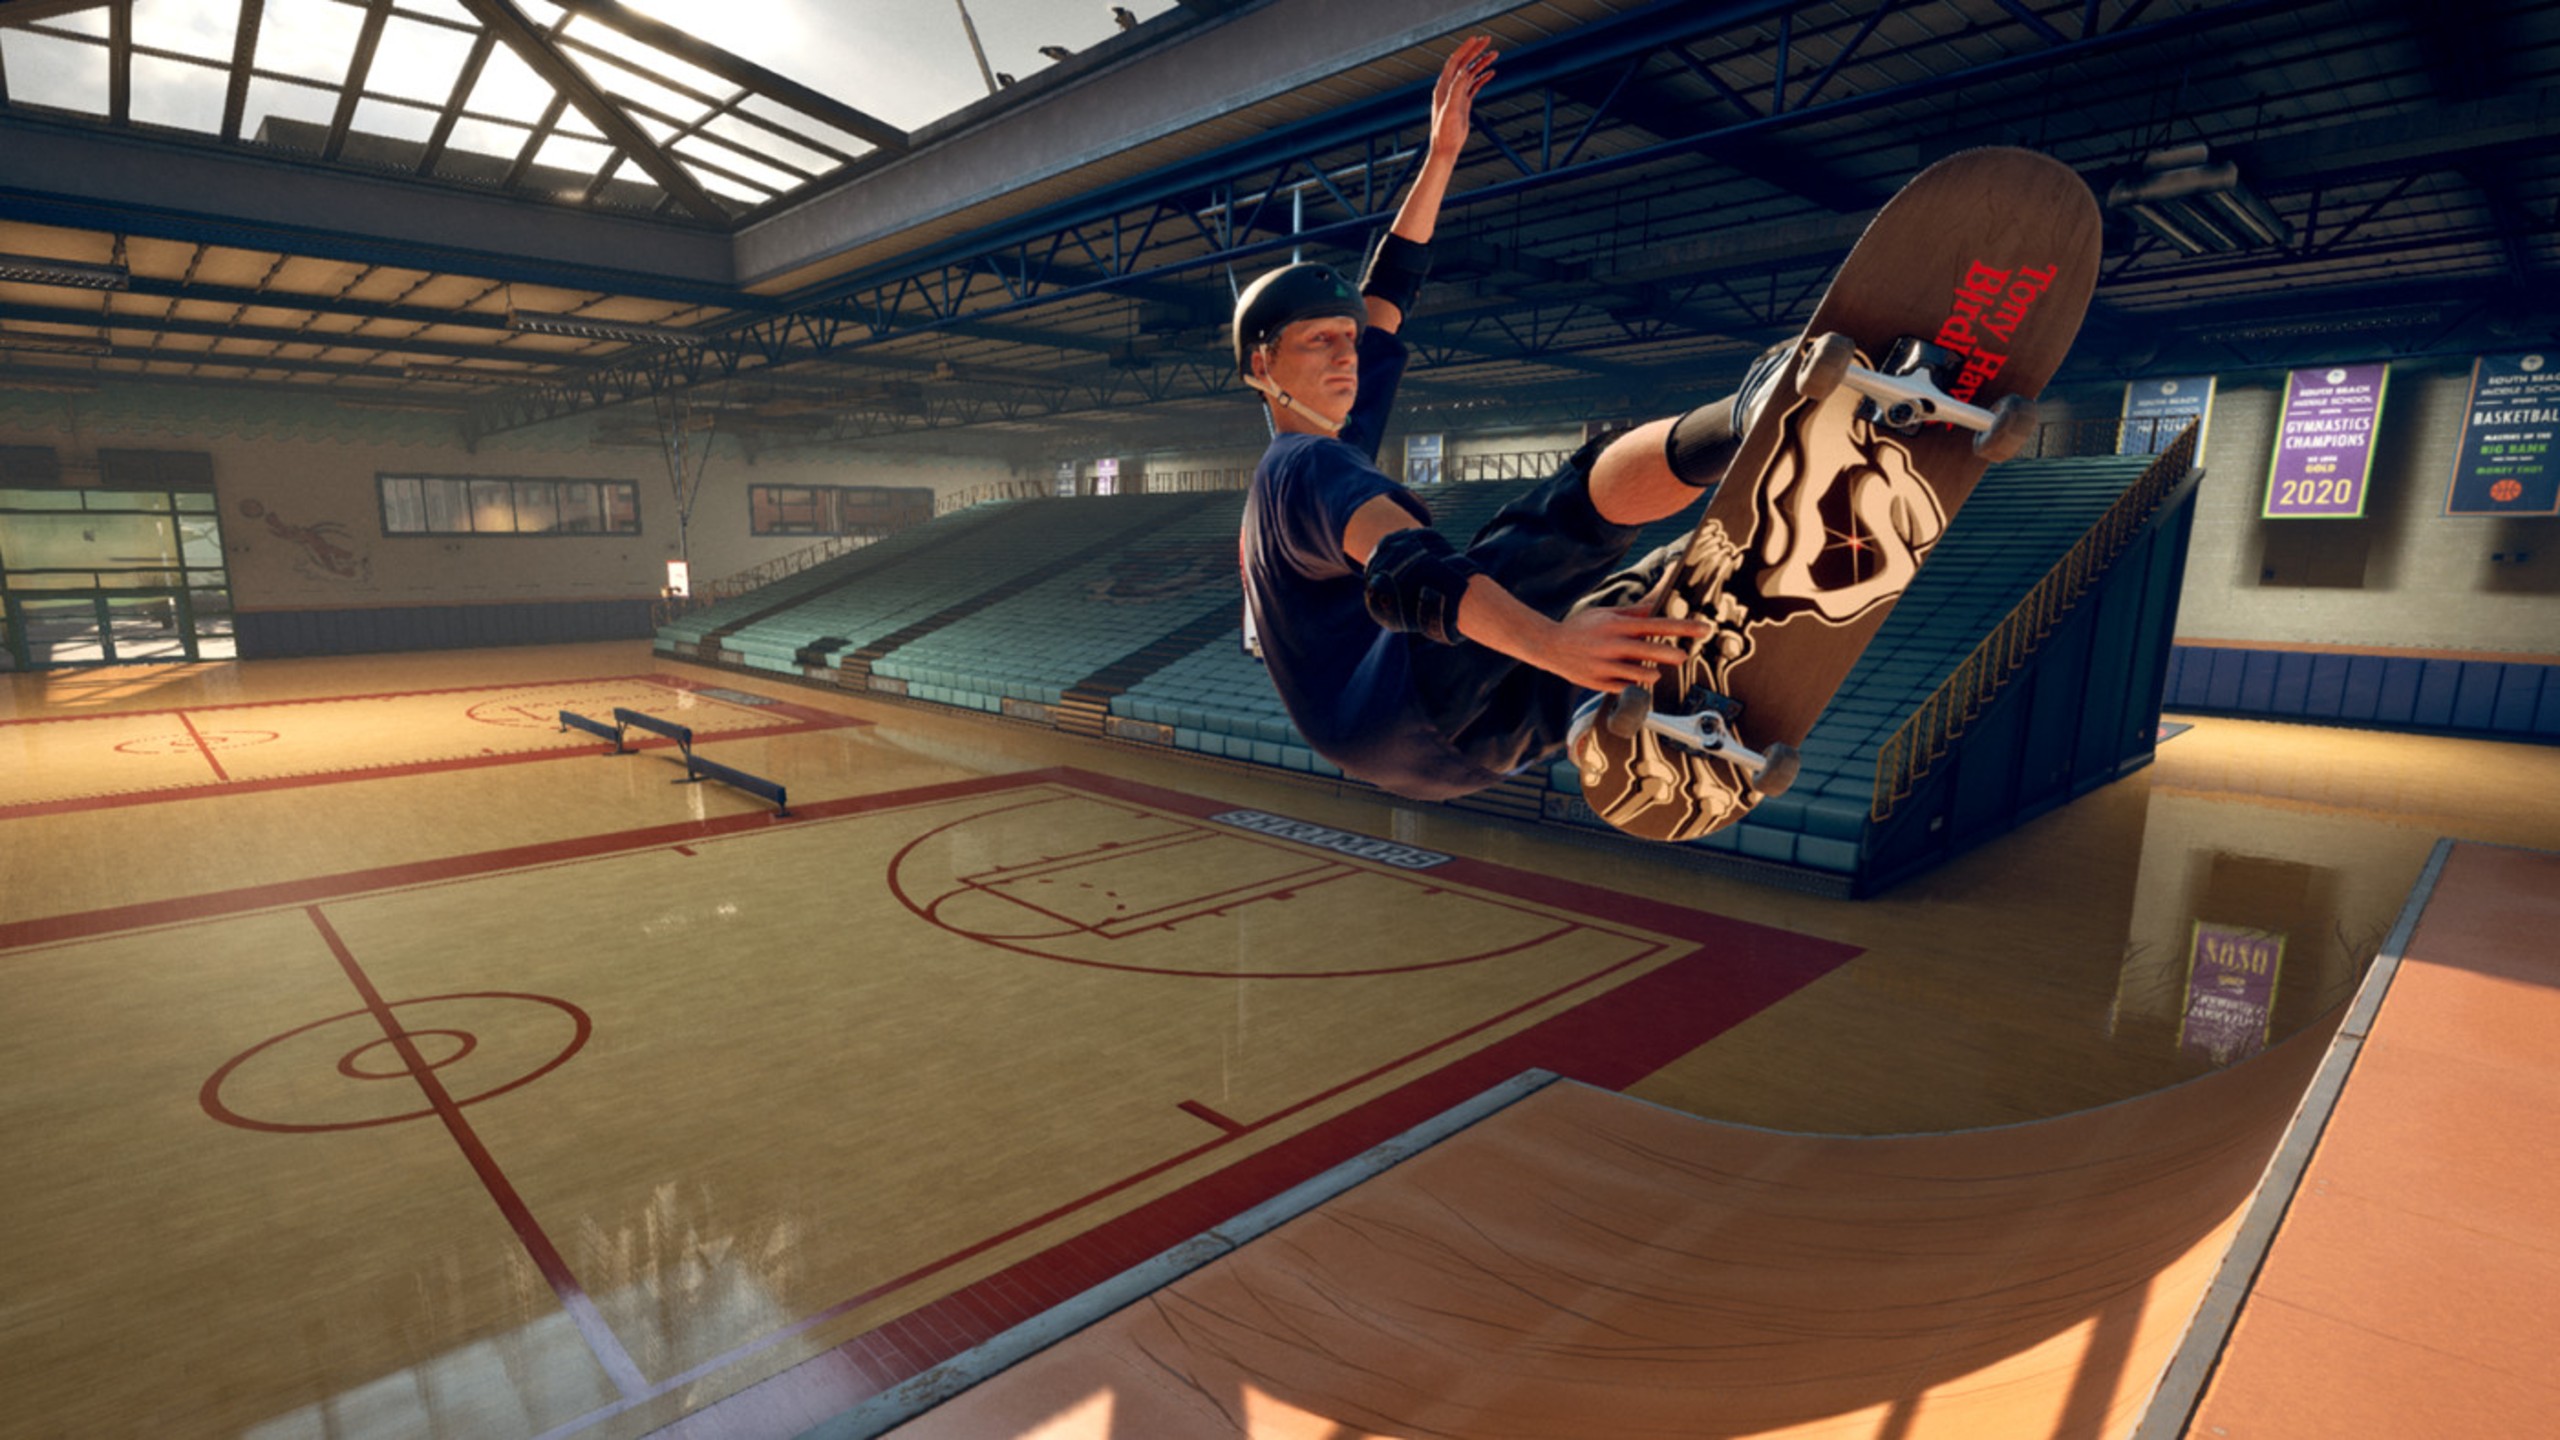 A new Tony Hawk's Pro Skater game could be in the works